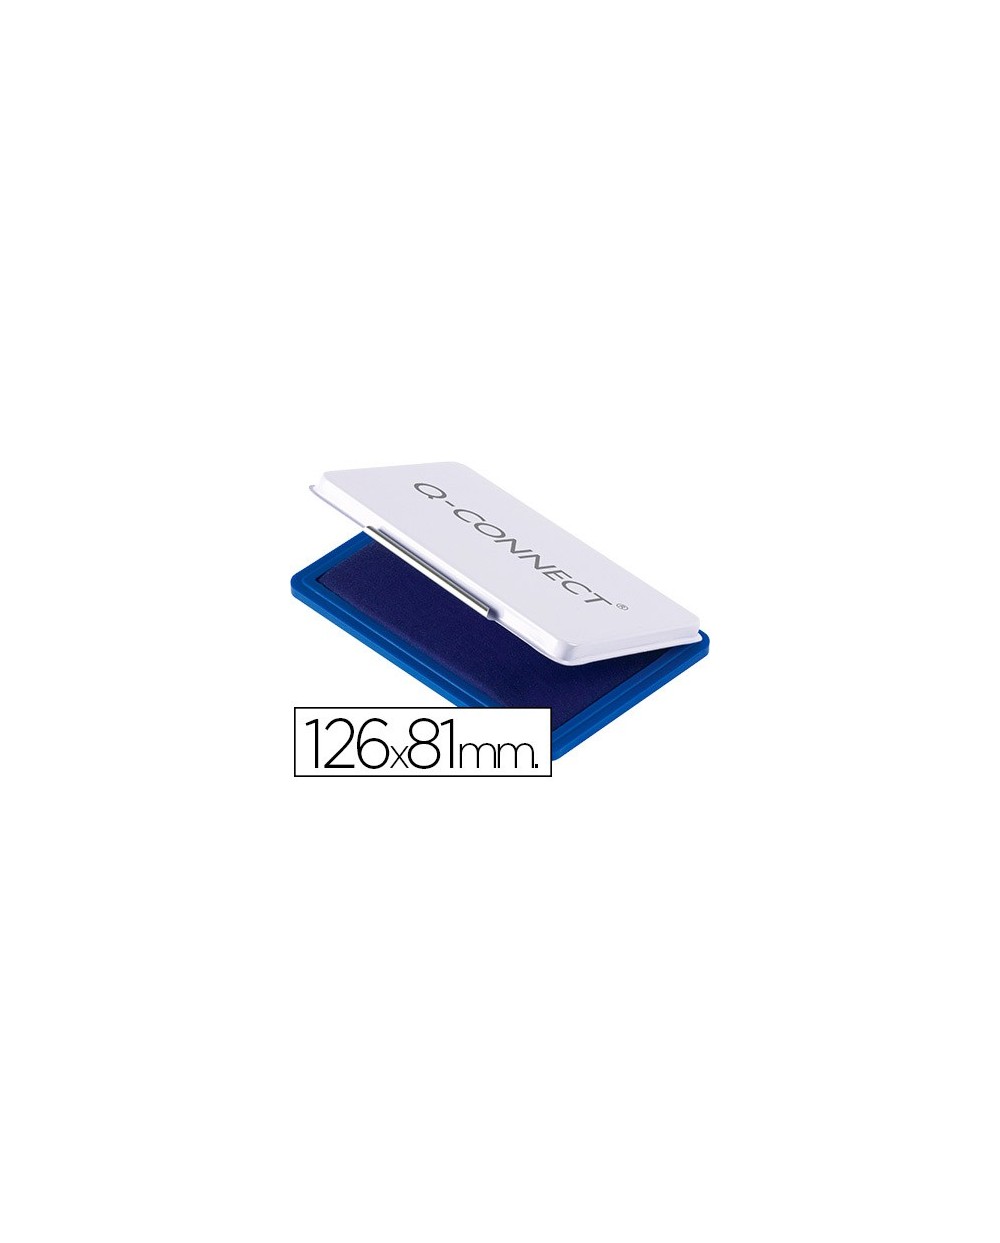 Tampon q connect n1 126x81 mm azul